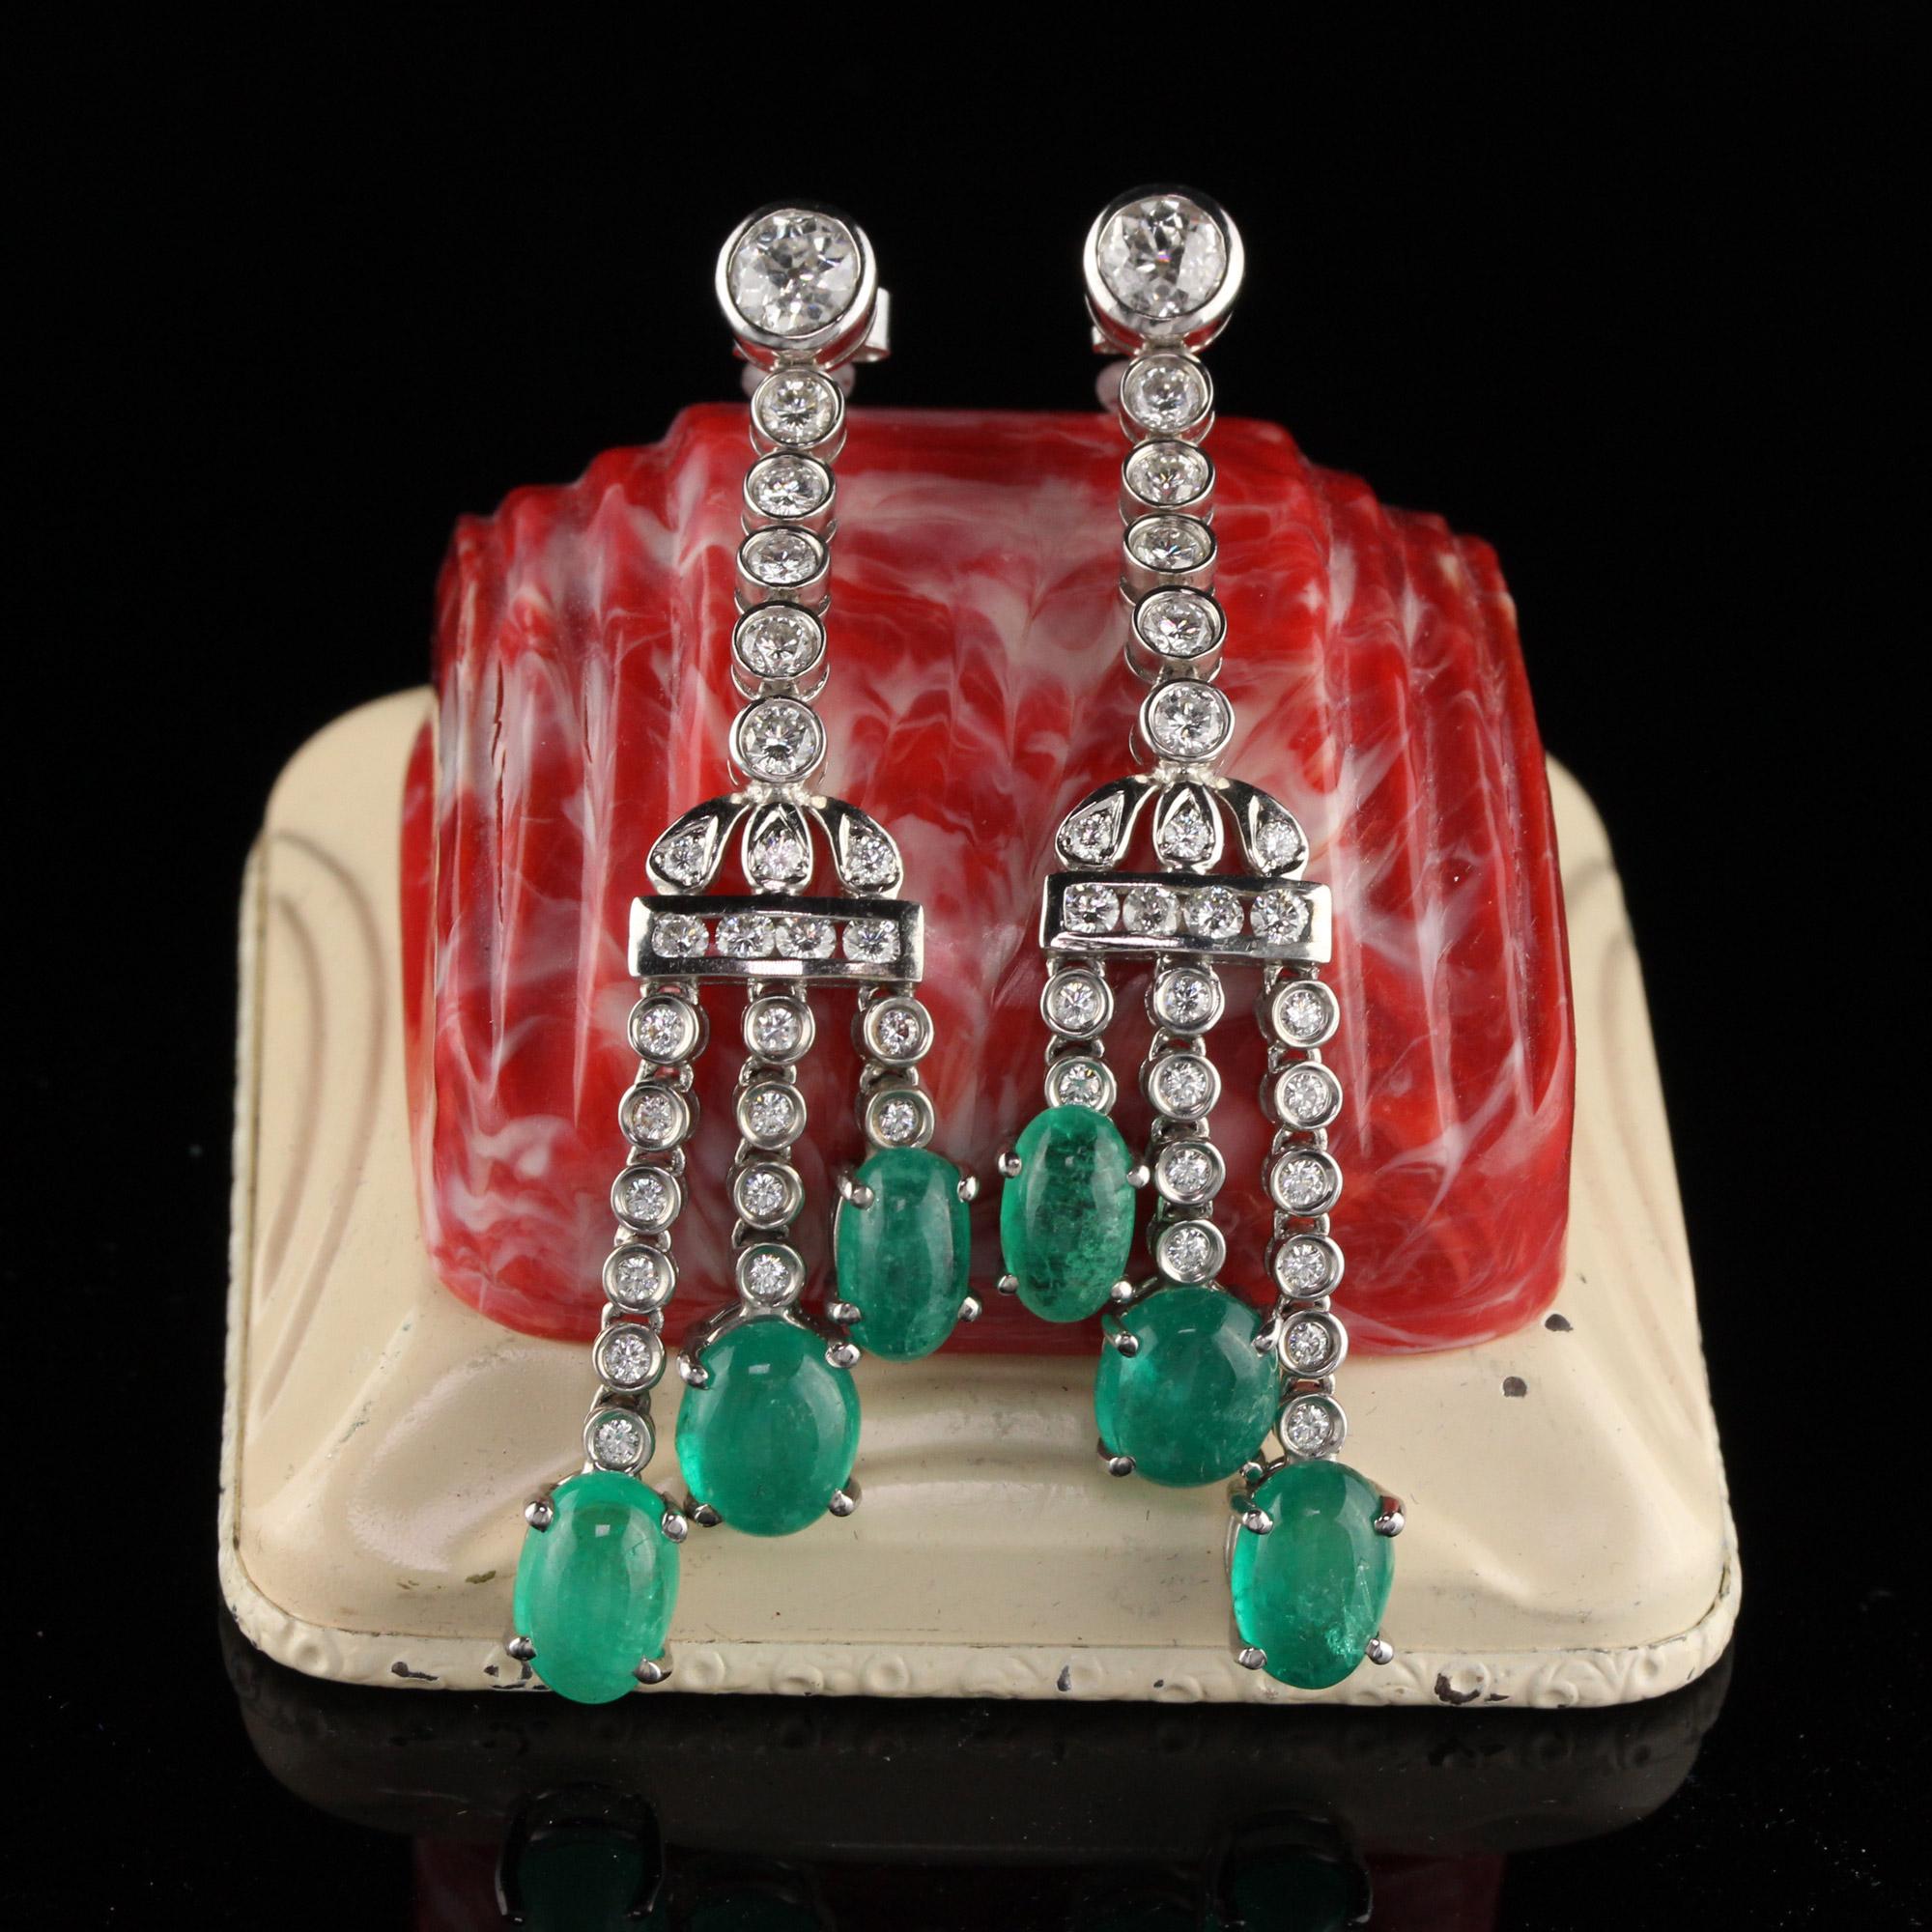 Elegant emerald and diamond drop earrings

Metal: White Gold
 
Weight: 13.5 grams

Diamond Weight: 2.5 ct 

Diamond Color: H

Diamond Clarity: SI1

Gemstone Weight: Approximately 6 ct

Measurements: 2 1/4 x 1/2 inches
